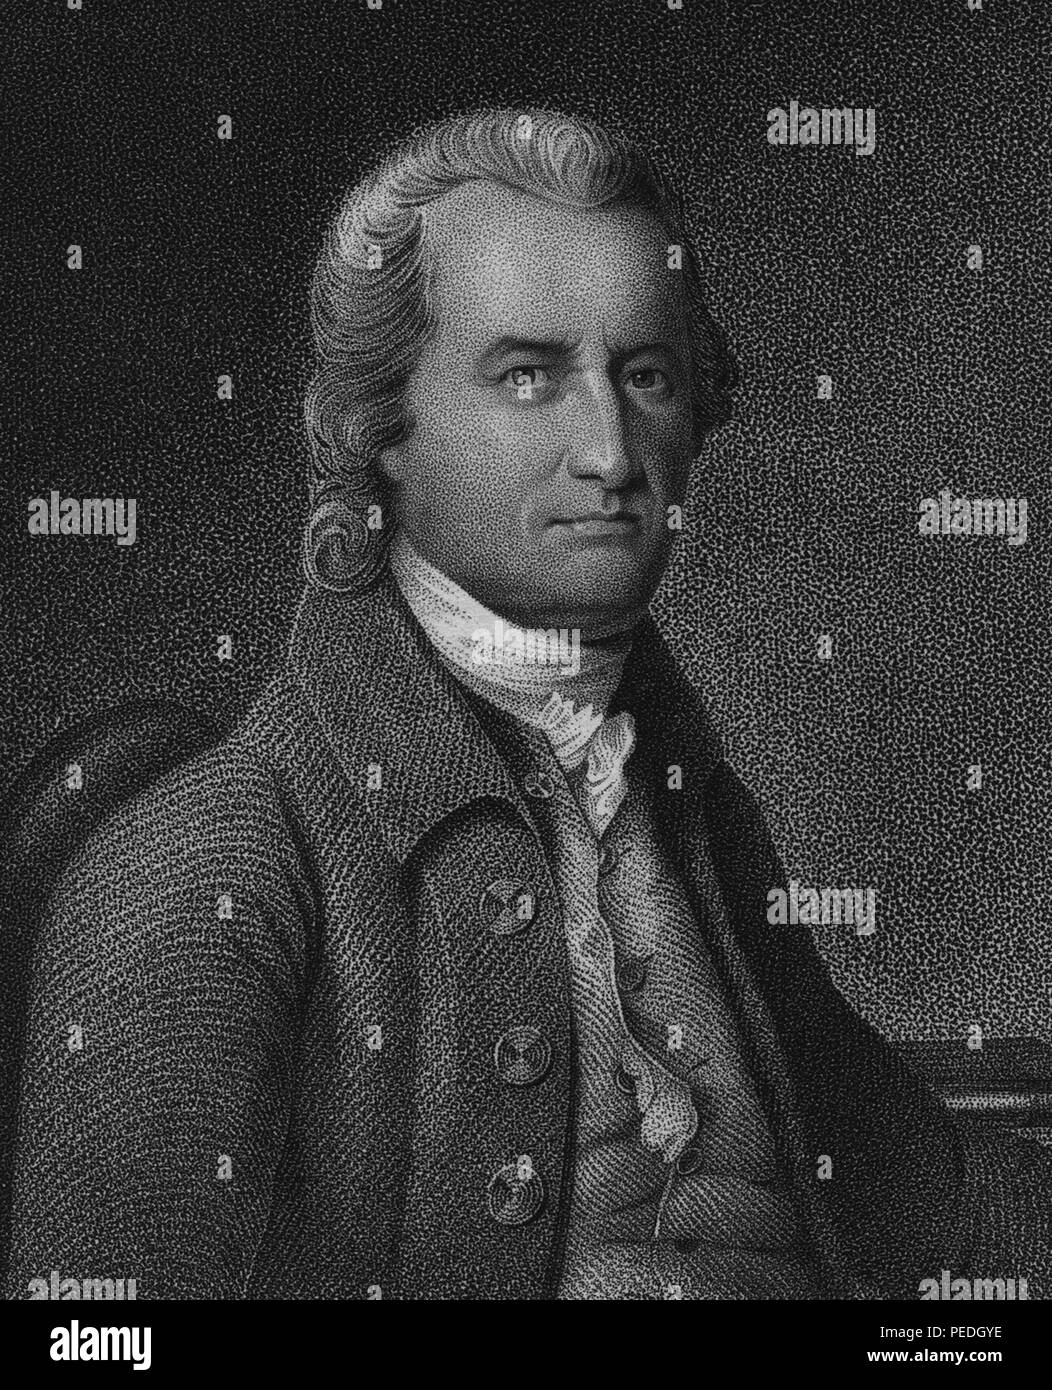 Engraved portrait of Oliver Wolcott, major general during the American Revolutionary War who signed the United States Declaration of Independence and Articles of Confederation, 1836. From the New York Public Library. () Stock Photo